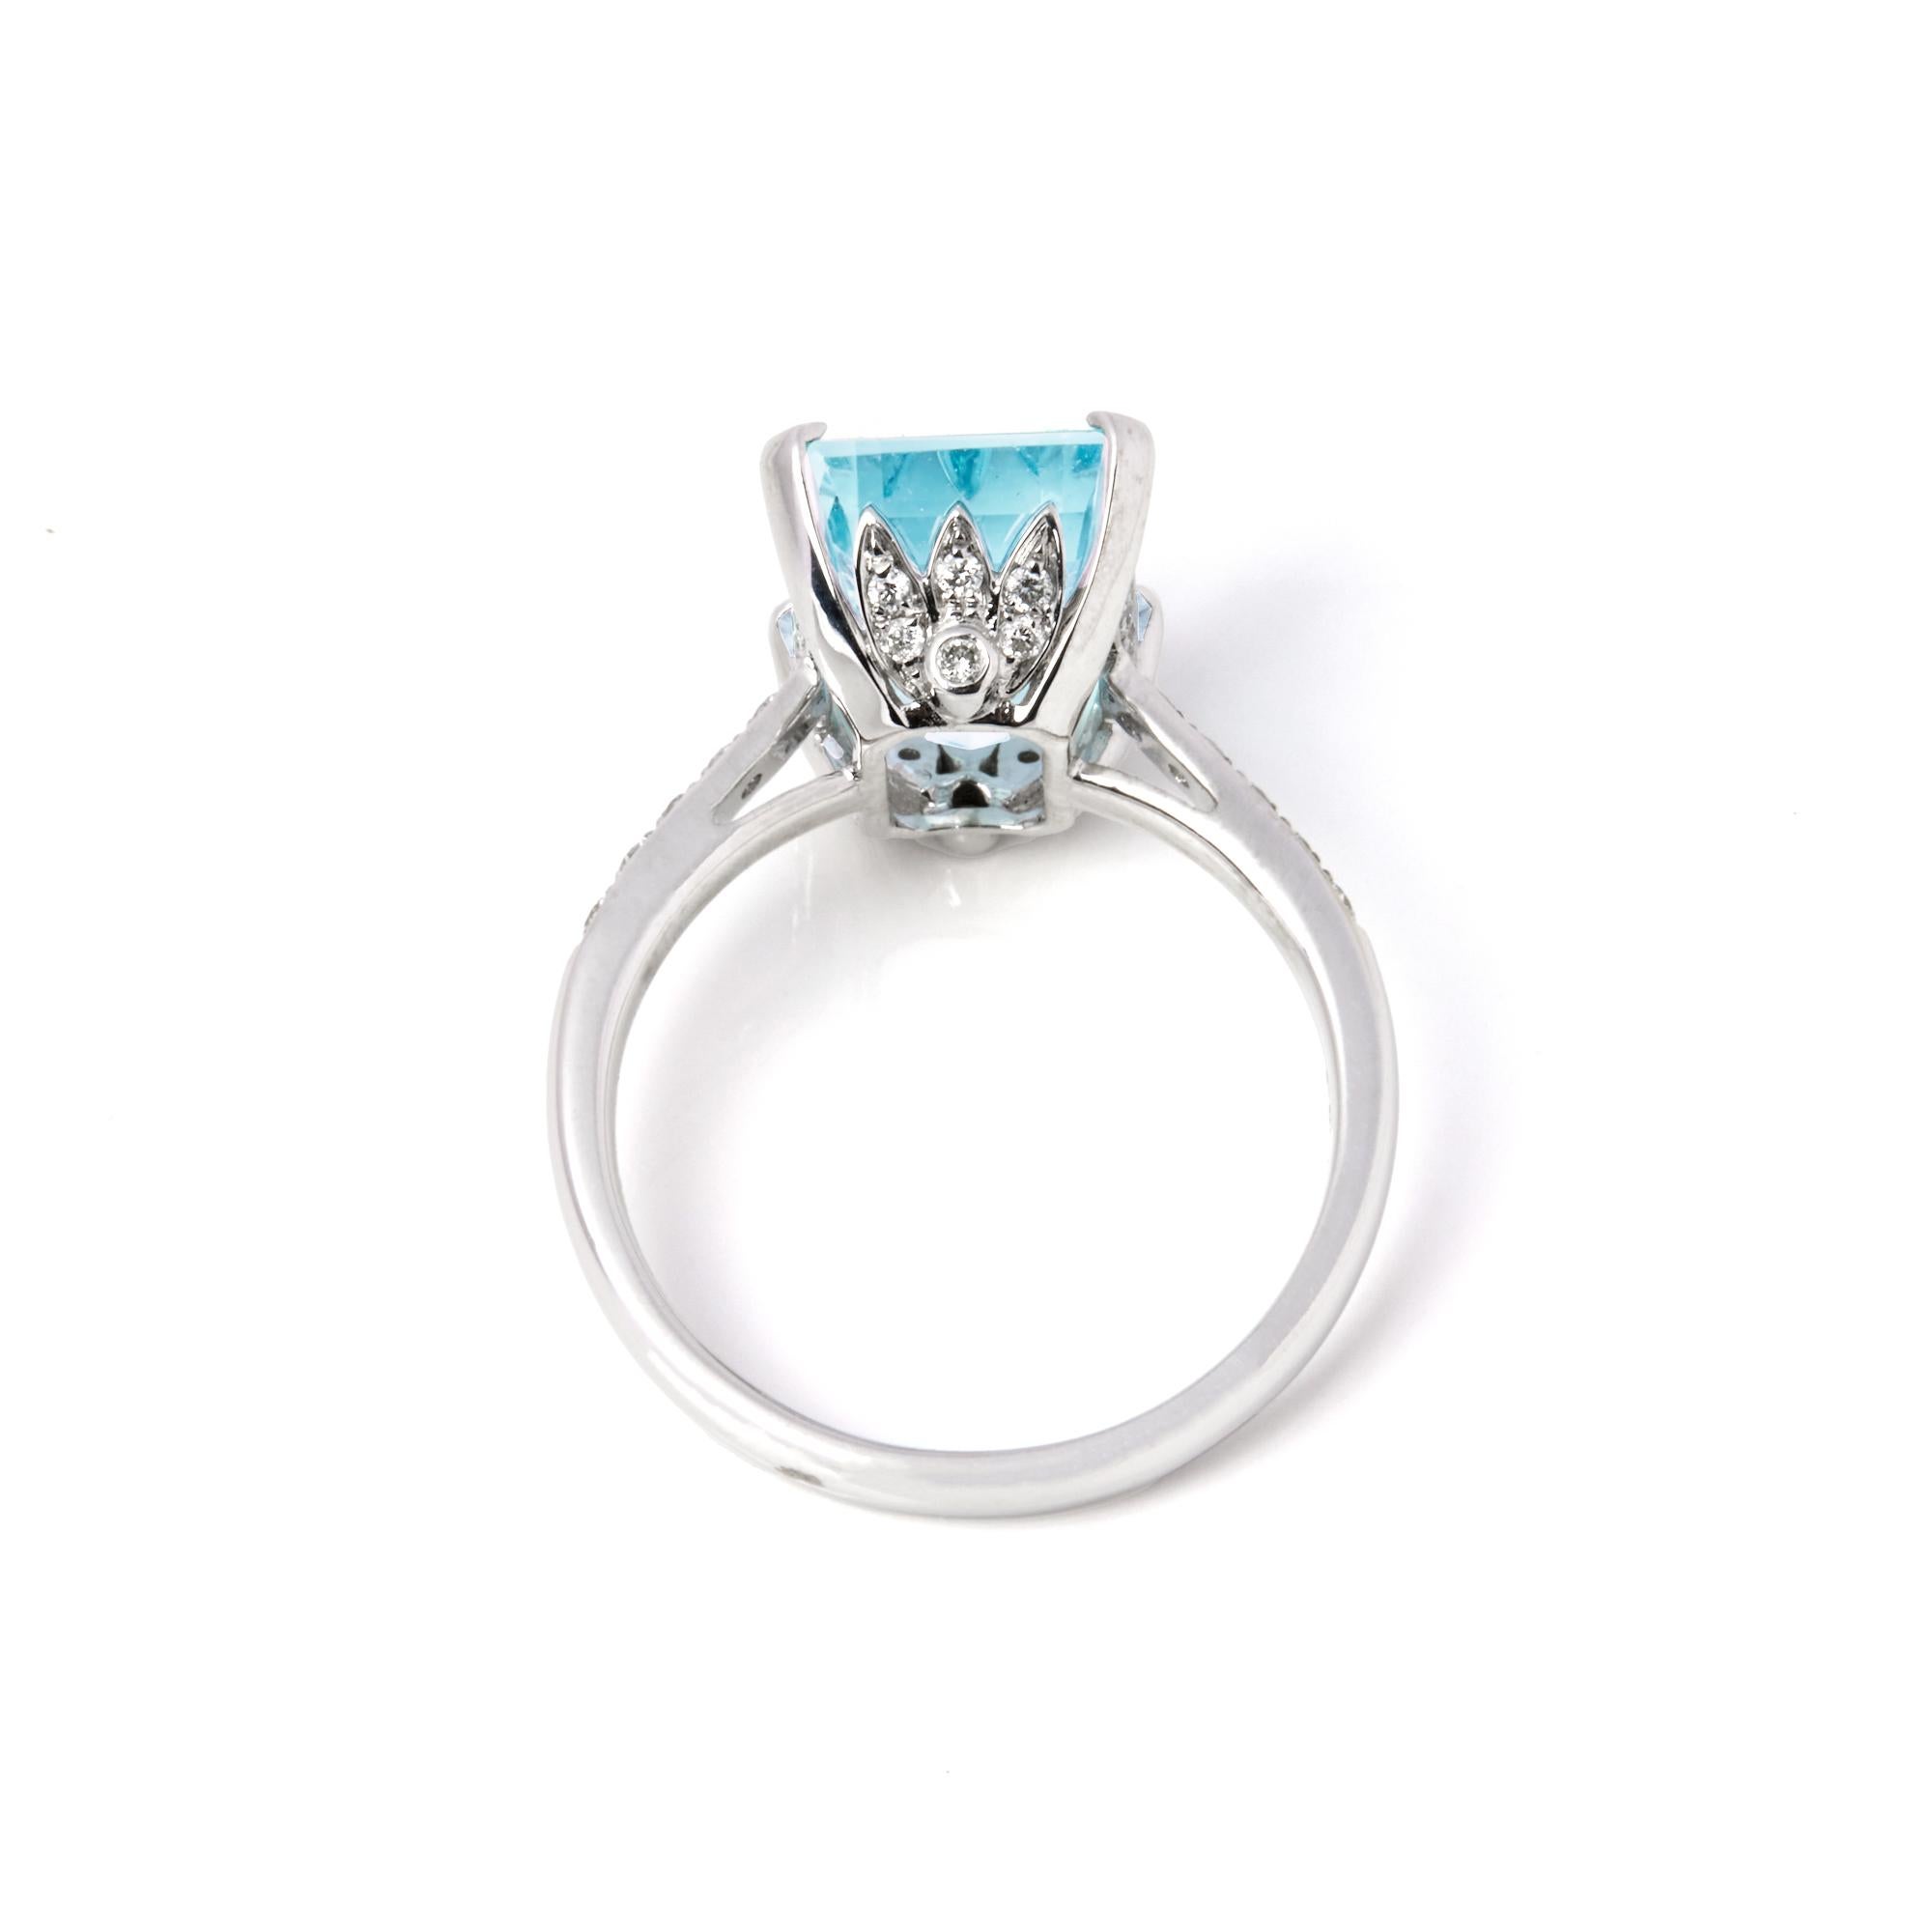 David Jerome Certified 5.61ct Emerald Cut Aquamarine and Diamond Ring In New Condition For Sale In Bishop's Stortford, Hertfordshire